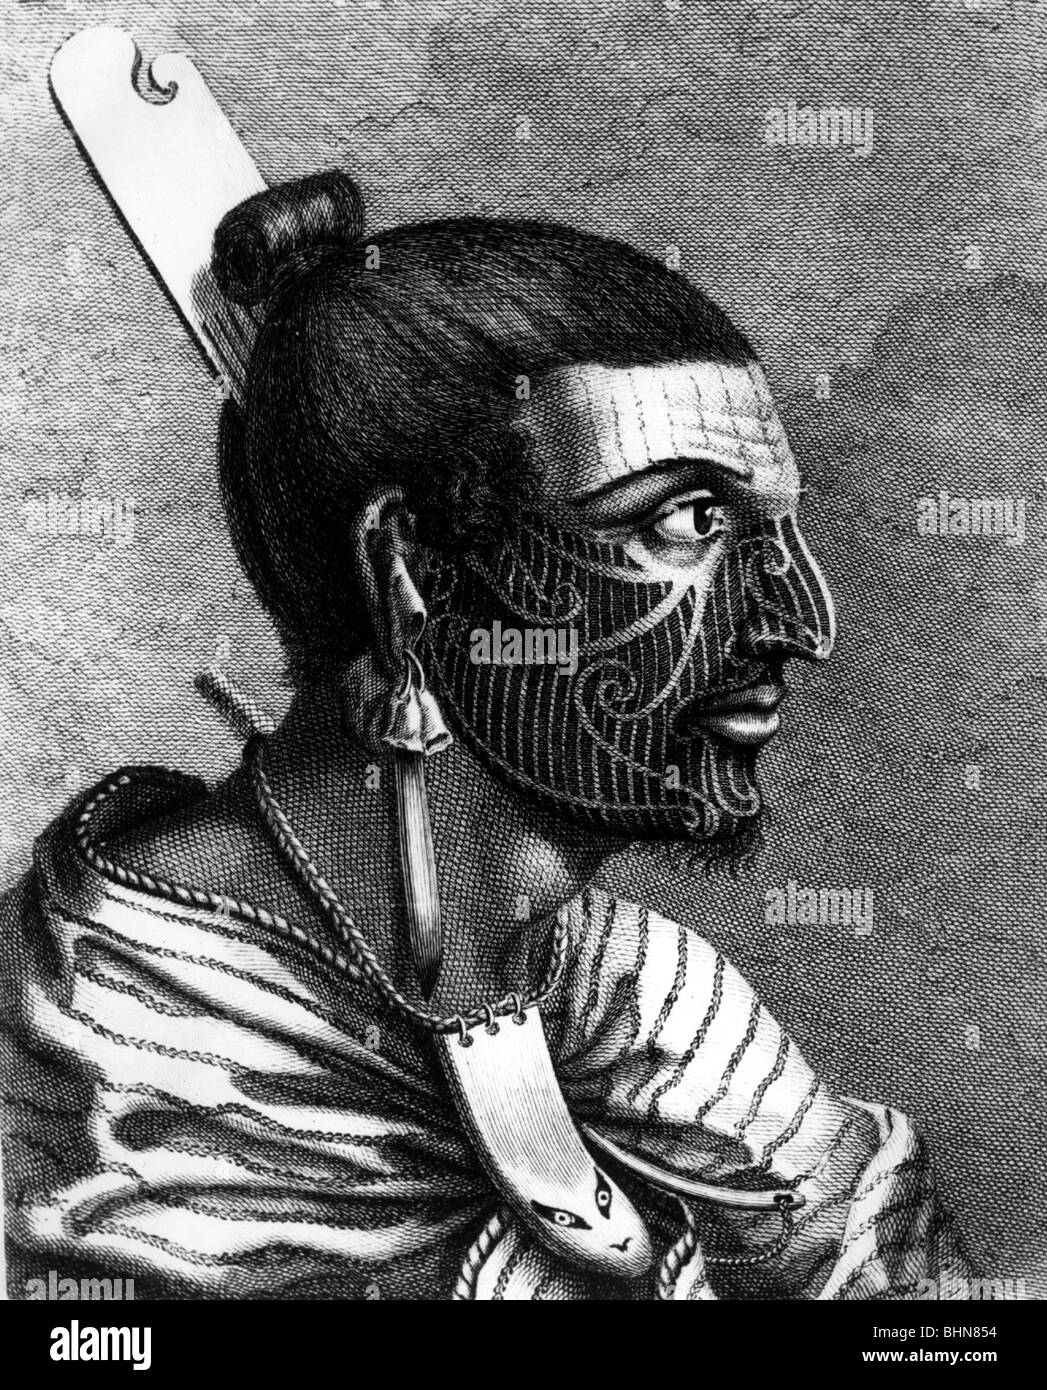 geography / travel, New Zealand, people, tattooed Maori warrior from Cooks Rerson, copper engraving from 18th century, historic, historical, tattoo, tattoos, face, earring, portrait, native, indigenous, man, ethnic, ethnology, Stock Photo